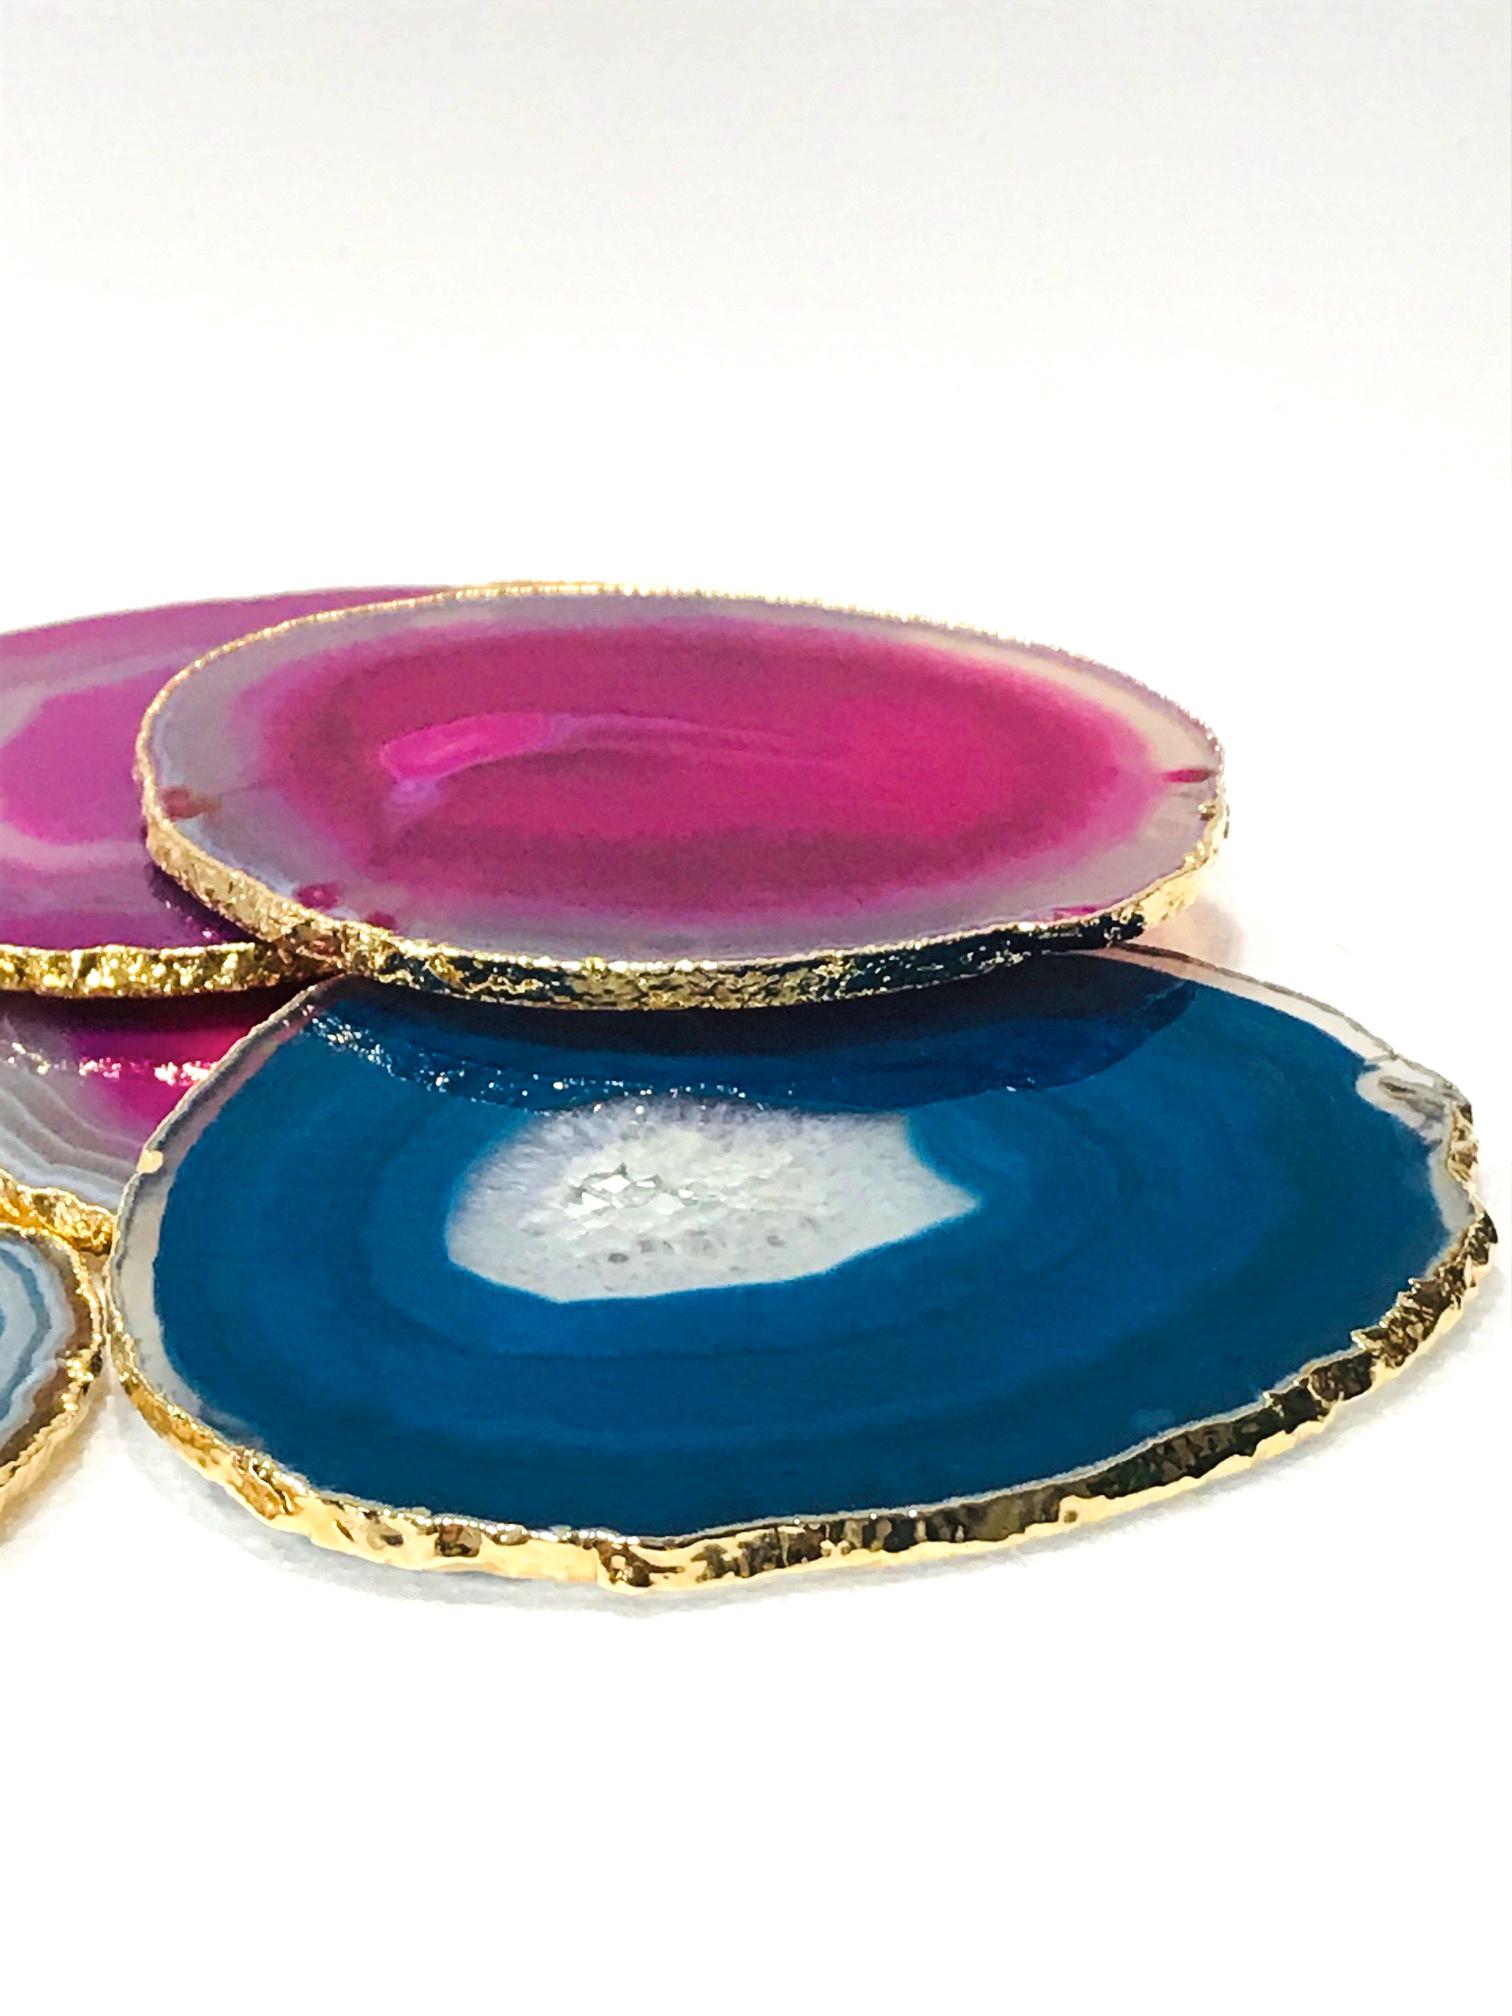 Hand-Crafted Set/ 8 Semi-Precious Gemstone Coasters in Pink and Turquoise with 24K Gold Trim